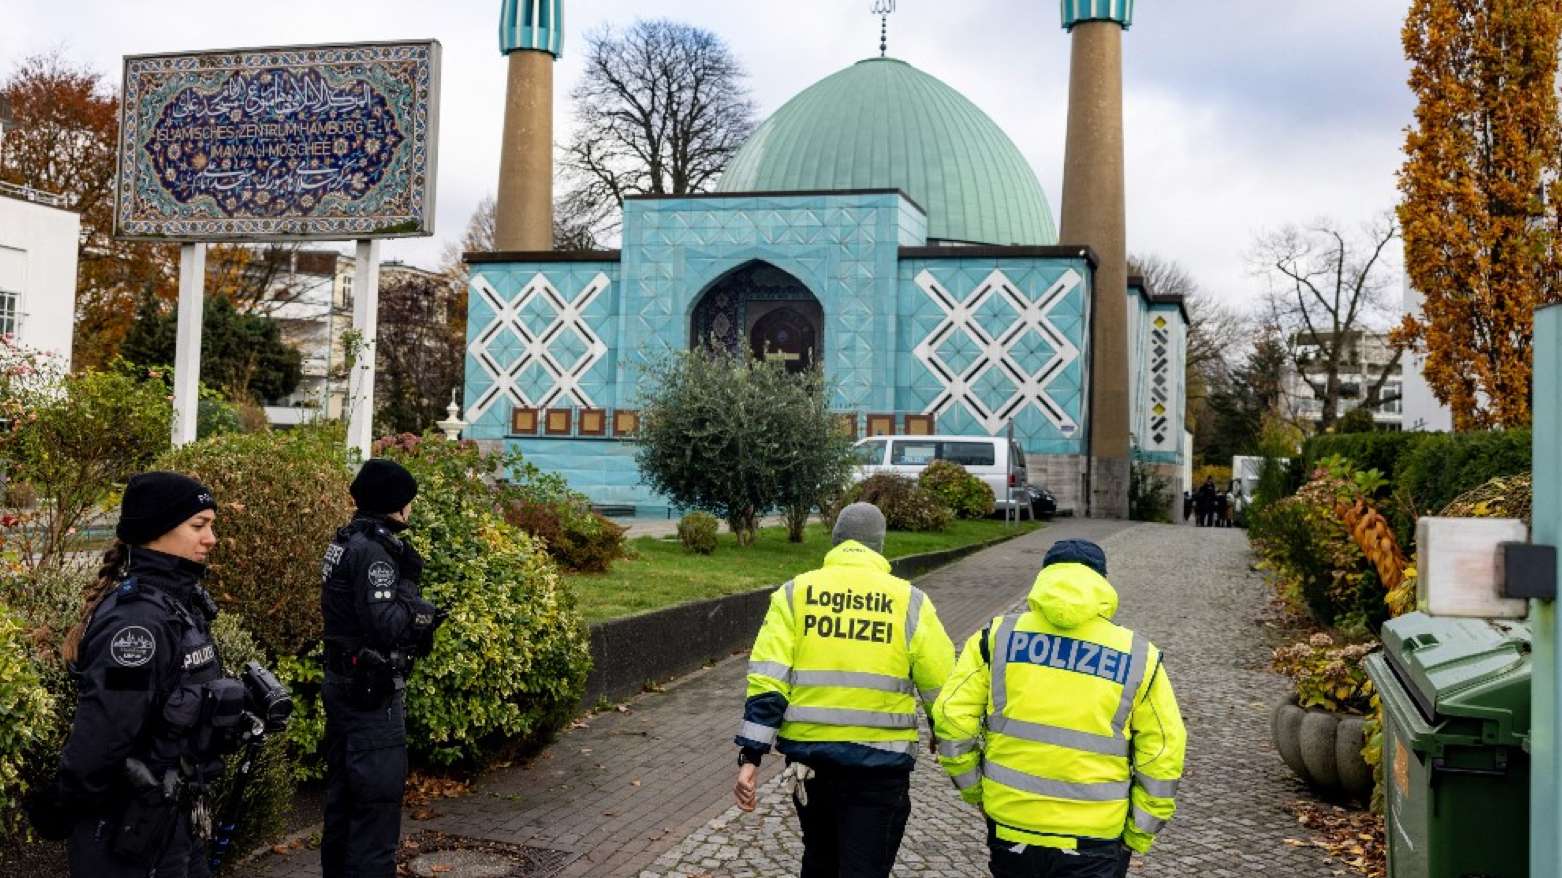 Police officers search the "Blue Mosque", housing the Islamic Centre of Hamburg, during raids across Germany over suspected links to the Iran-backed Hezbollah group (Photo: Axel Heimken/AFP)